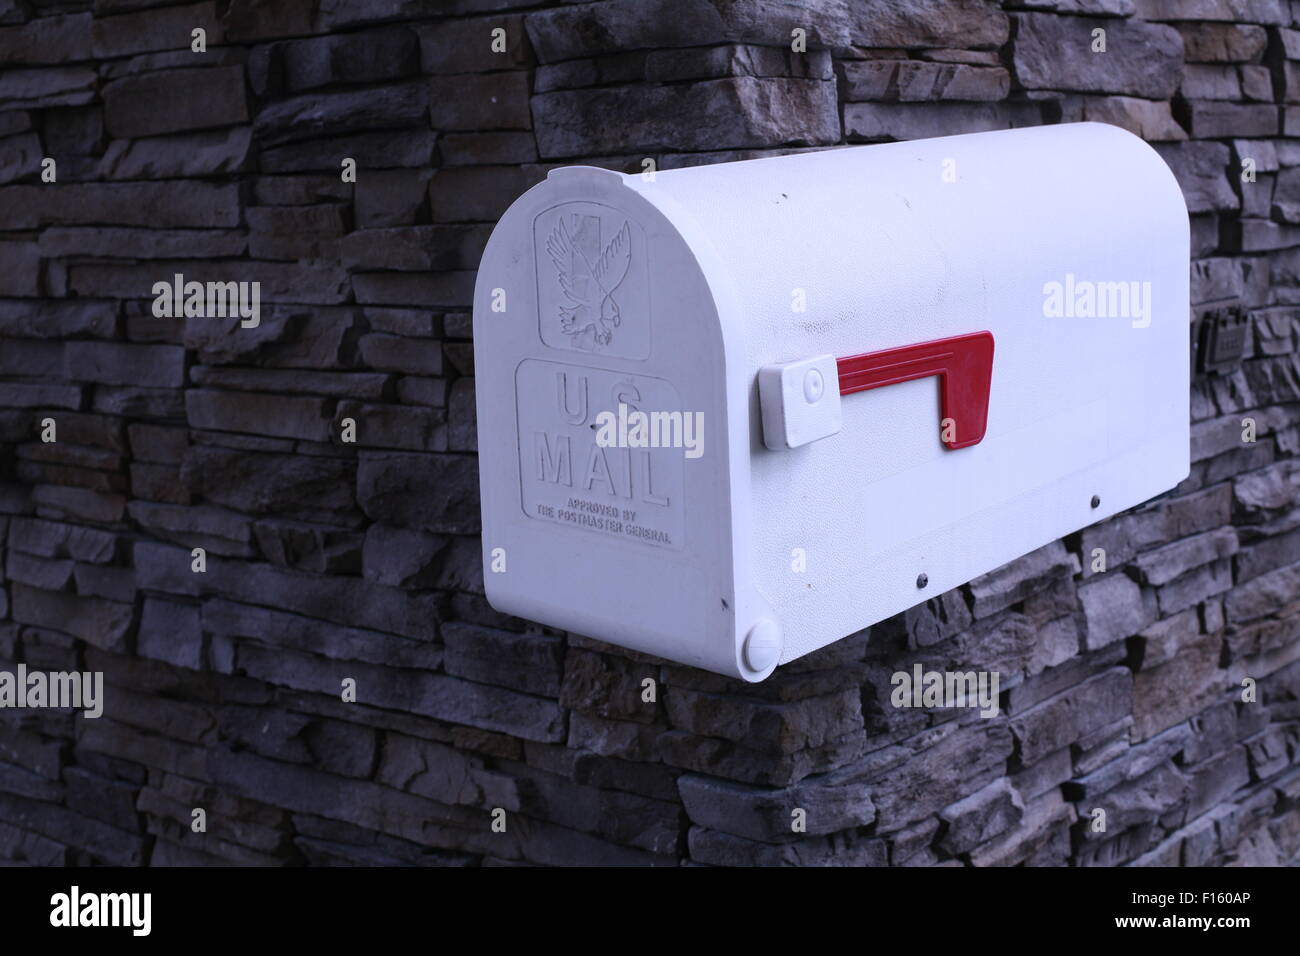 U.S mailbox in the countryside Stock Photo